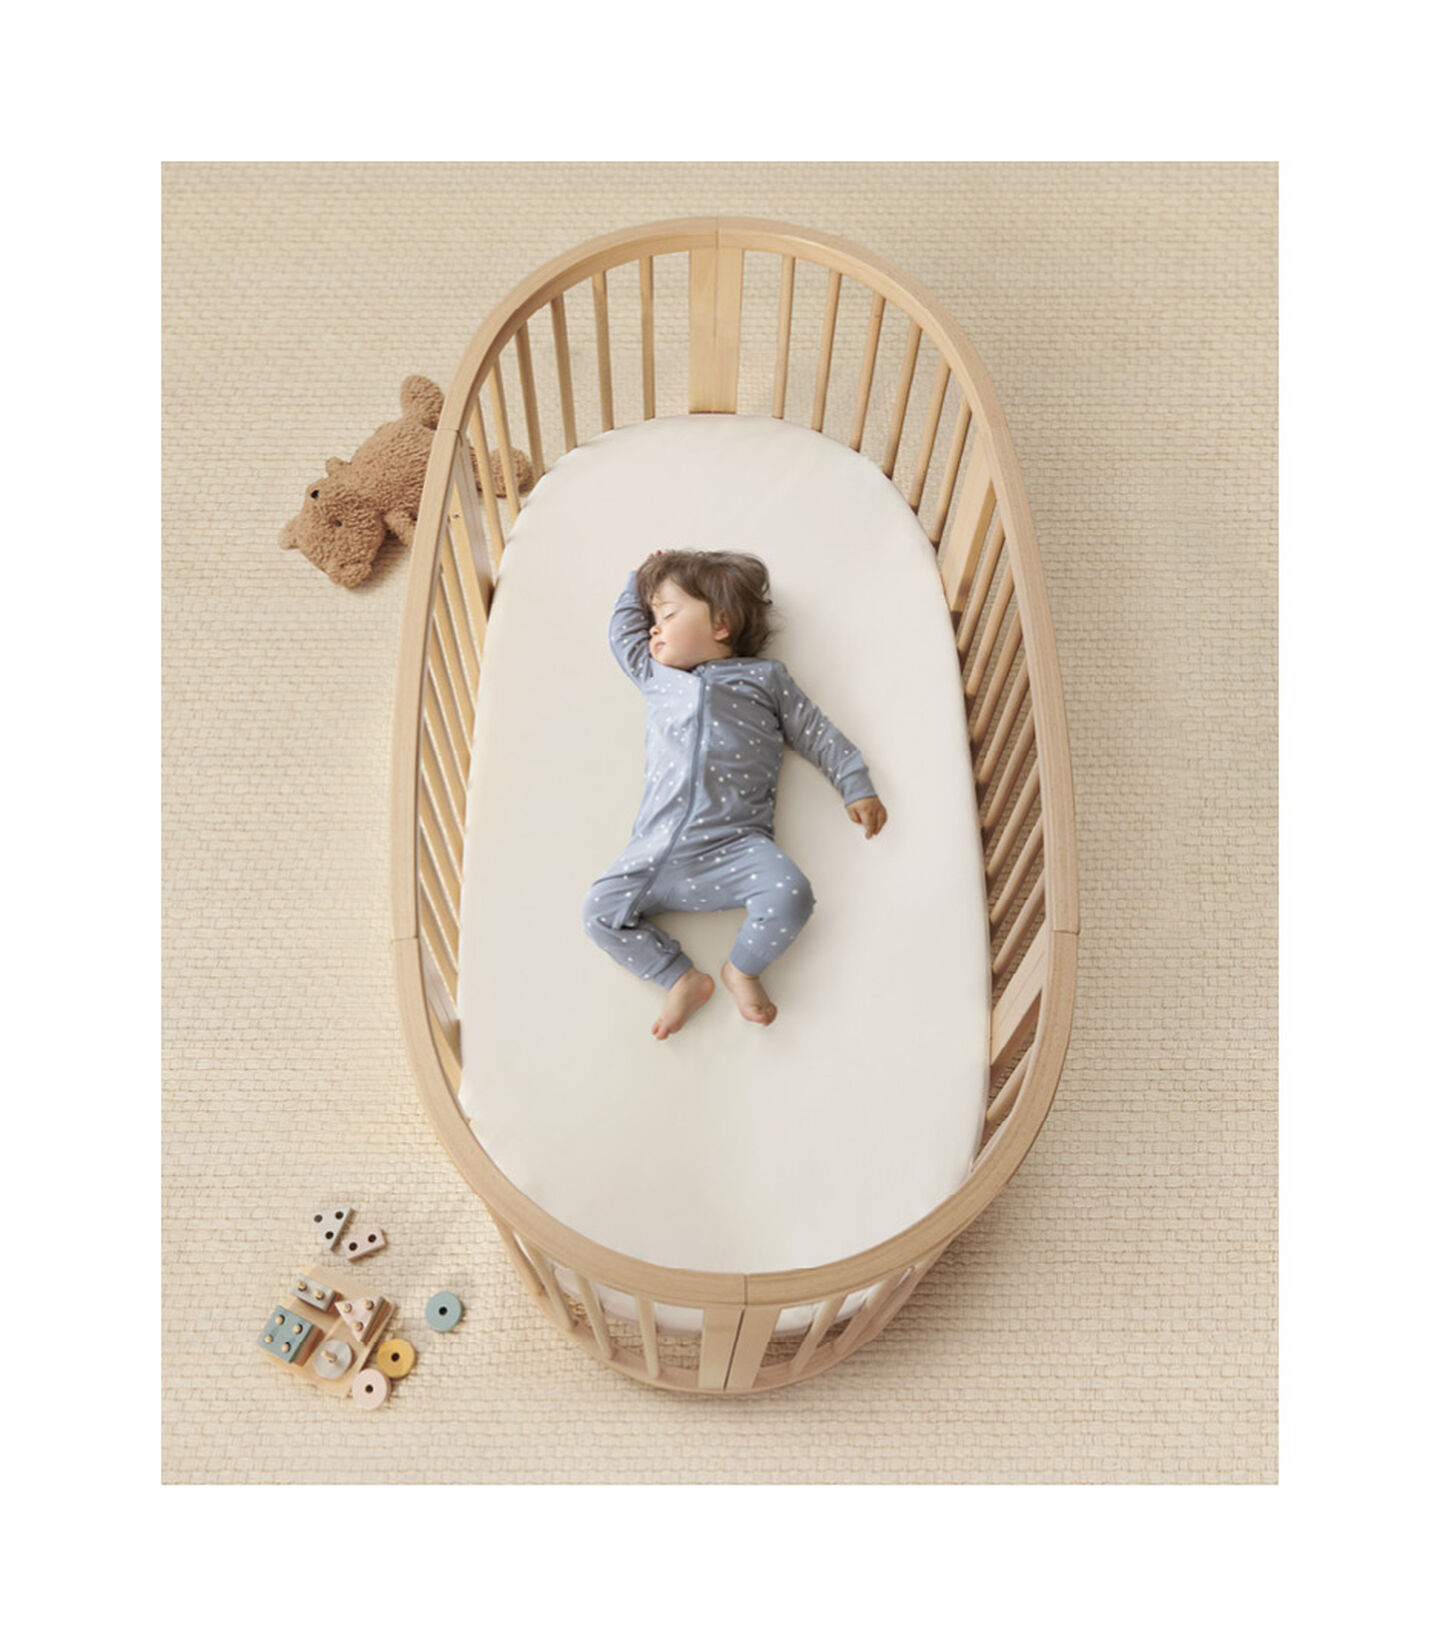 Stokke® Sleepi™ Bed V3 Natural. Closed, with mattress. view 4